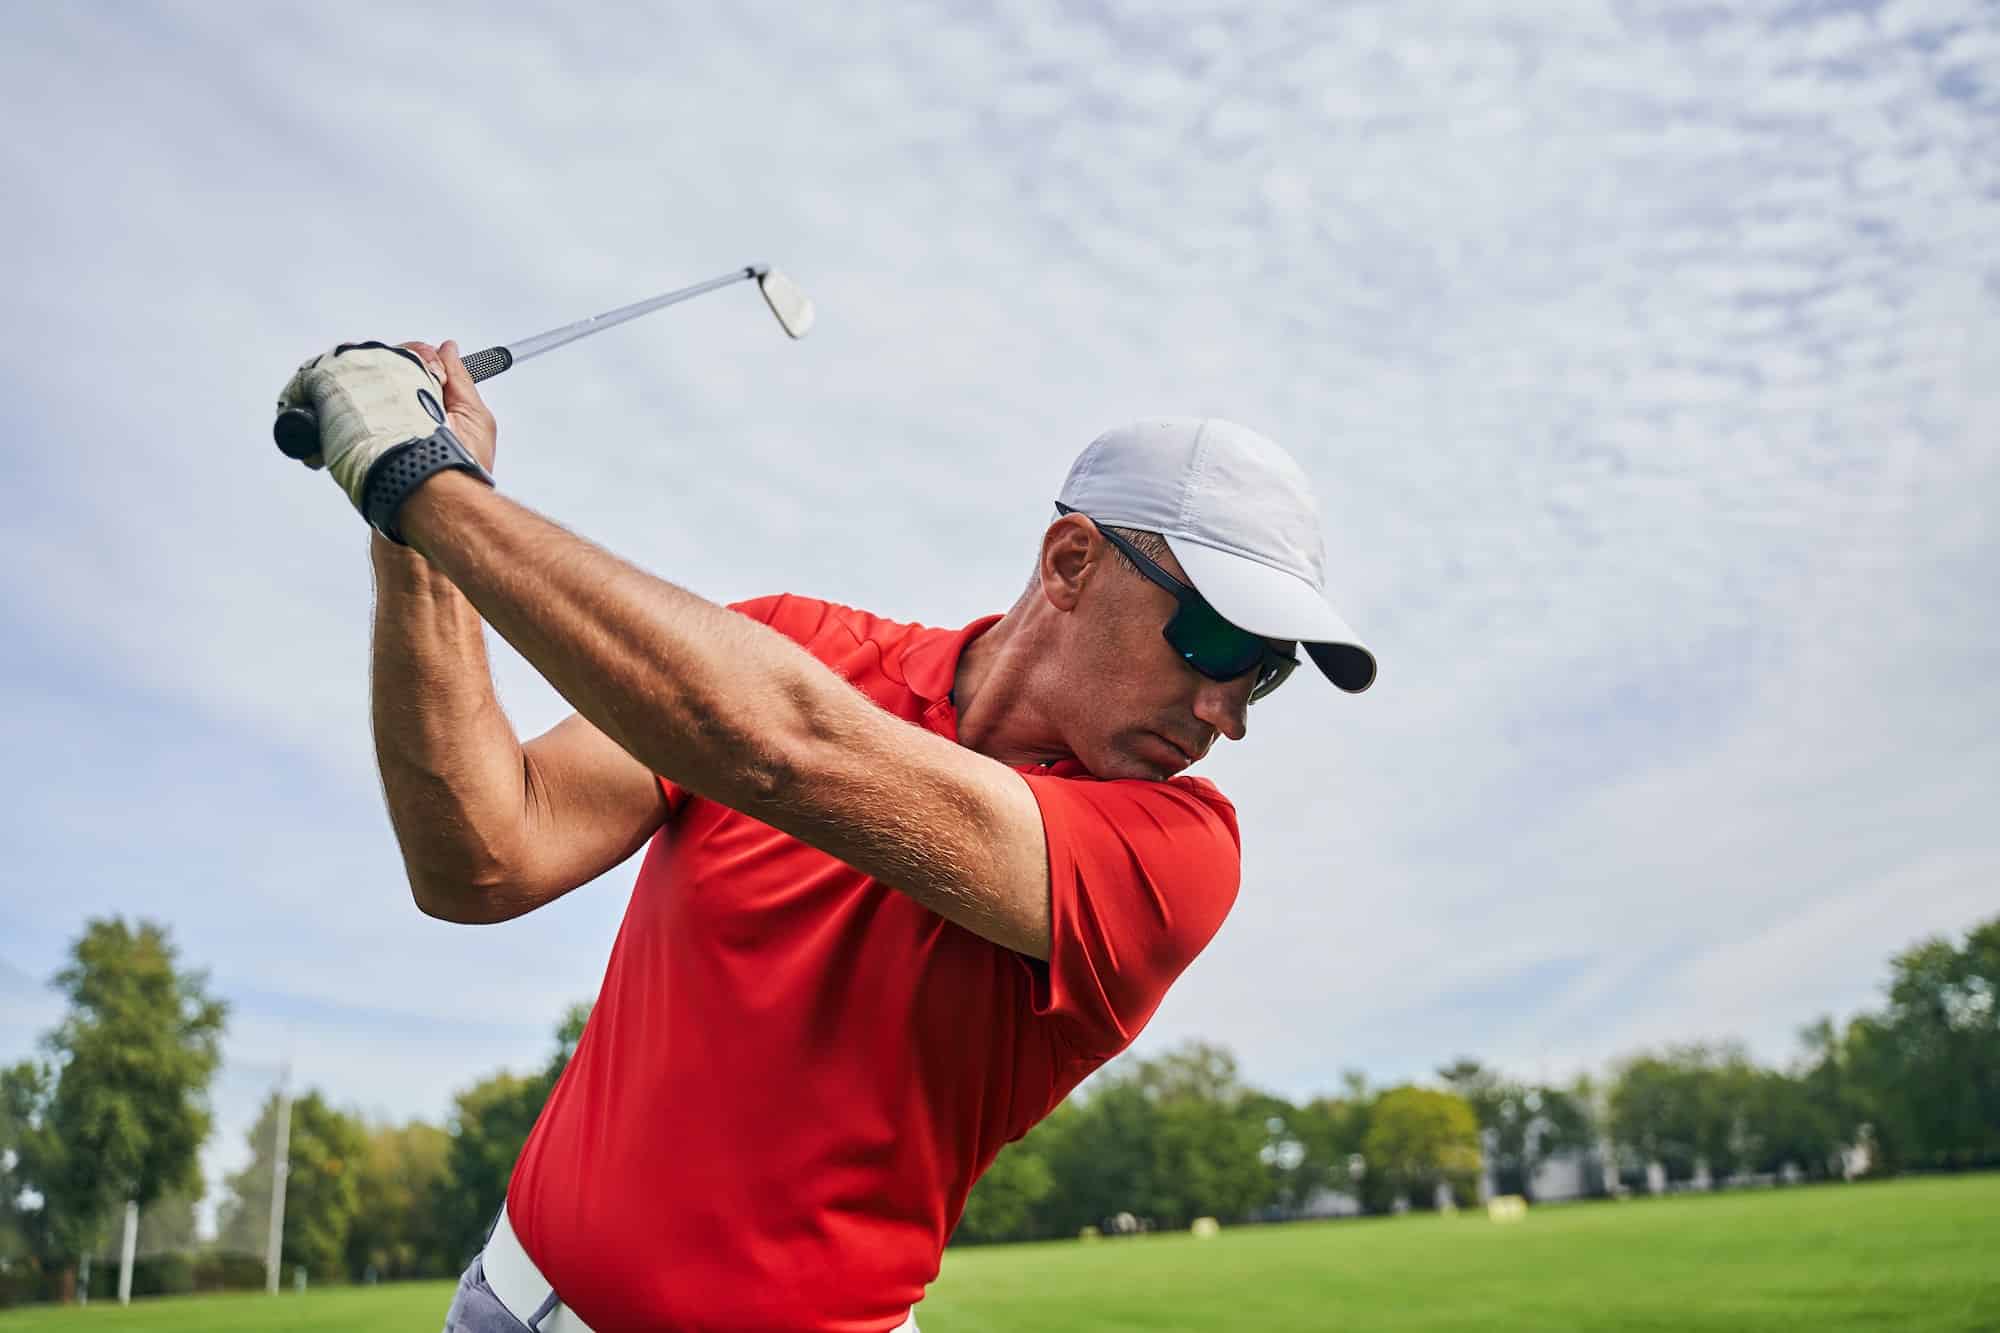 Golfer's Wrist Pain and Exercises That Help - Physio Ed.